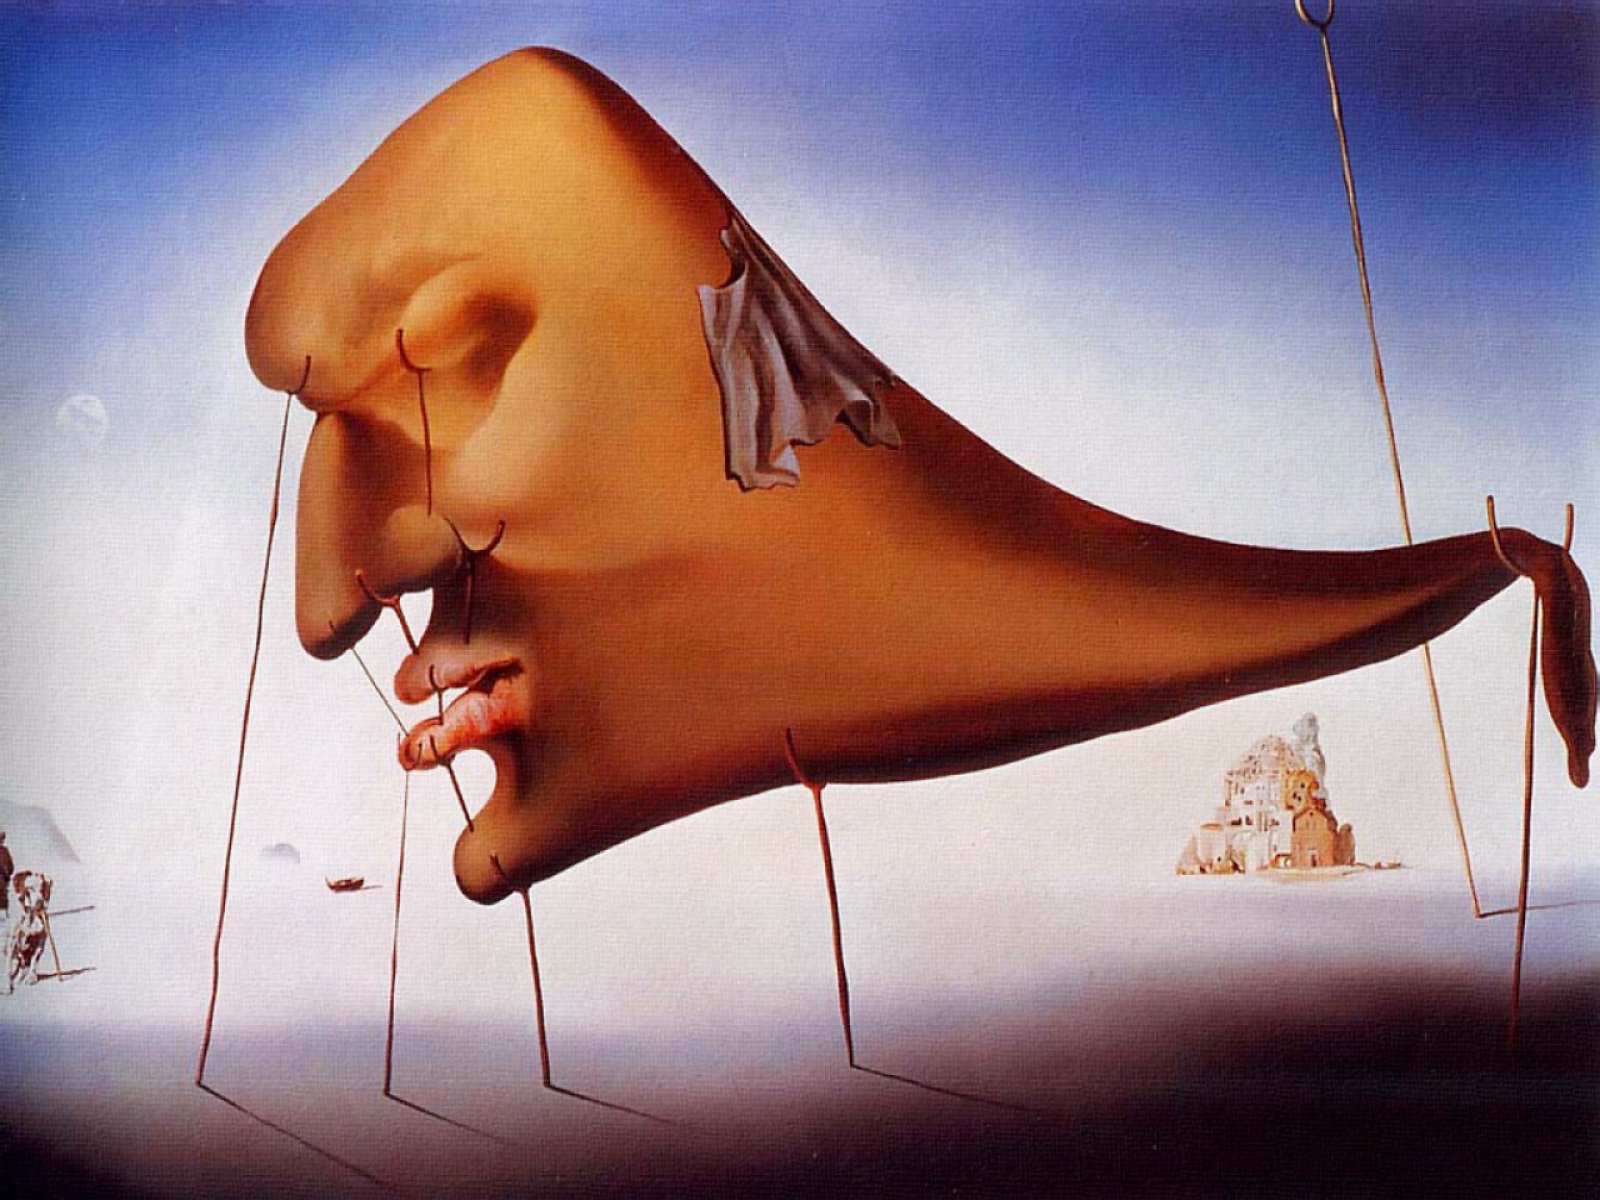 Sleep Le Sommeil By Salvador Dali Painting Fine